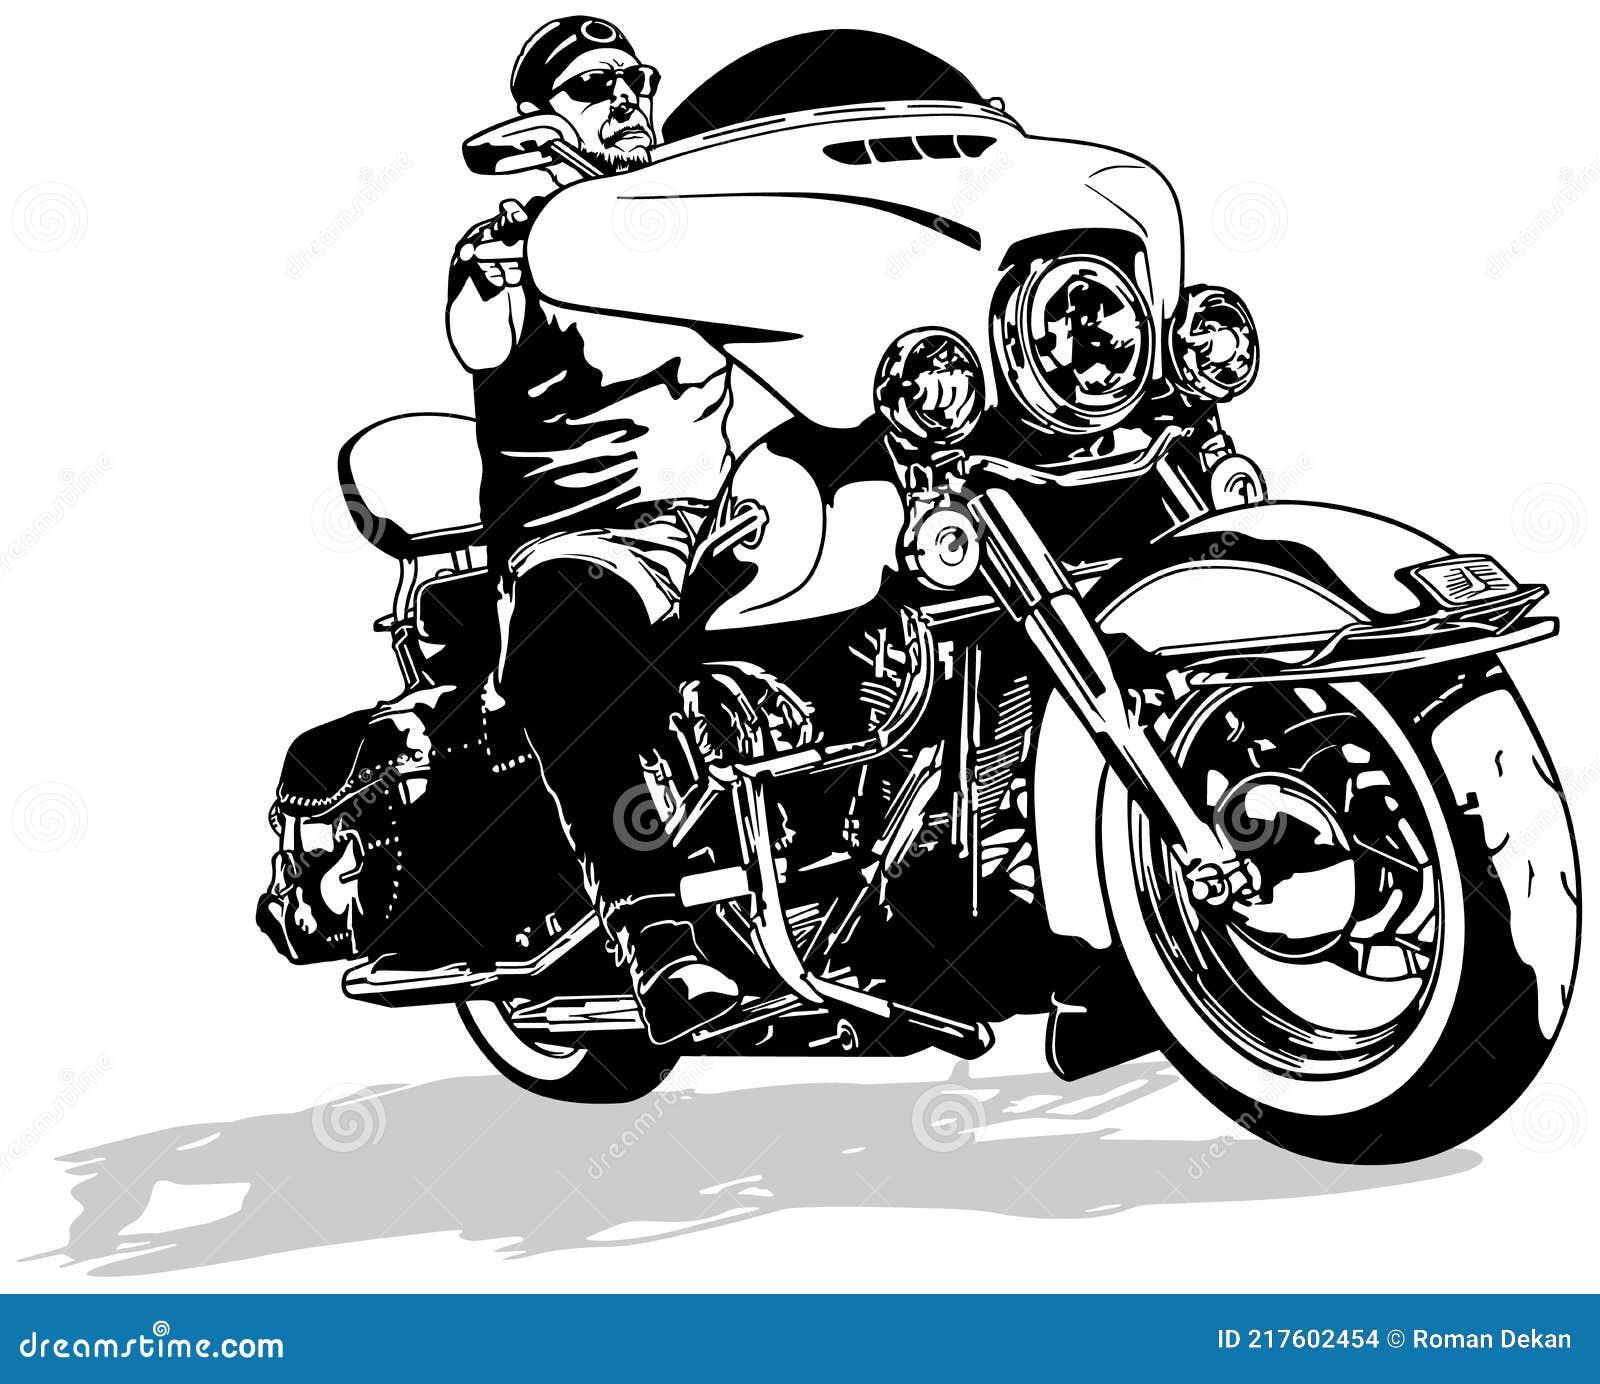 motorcyclist on motorcycle drawing